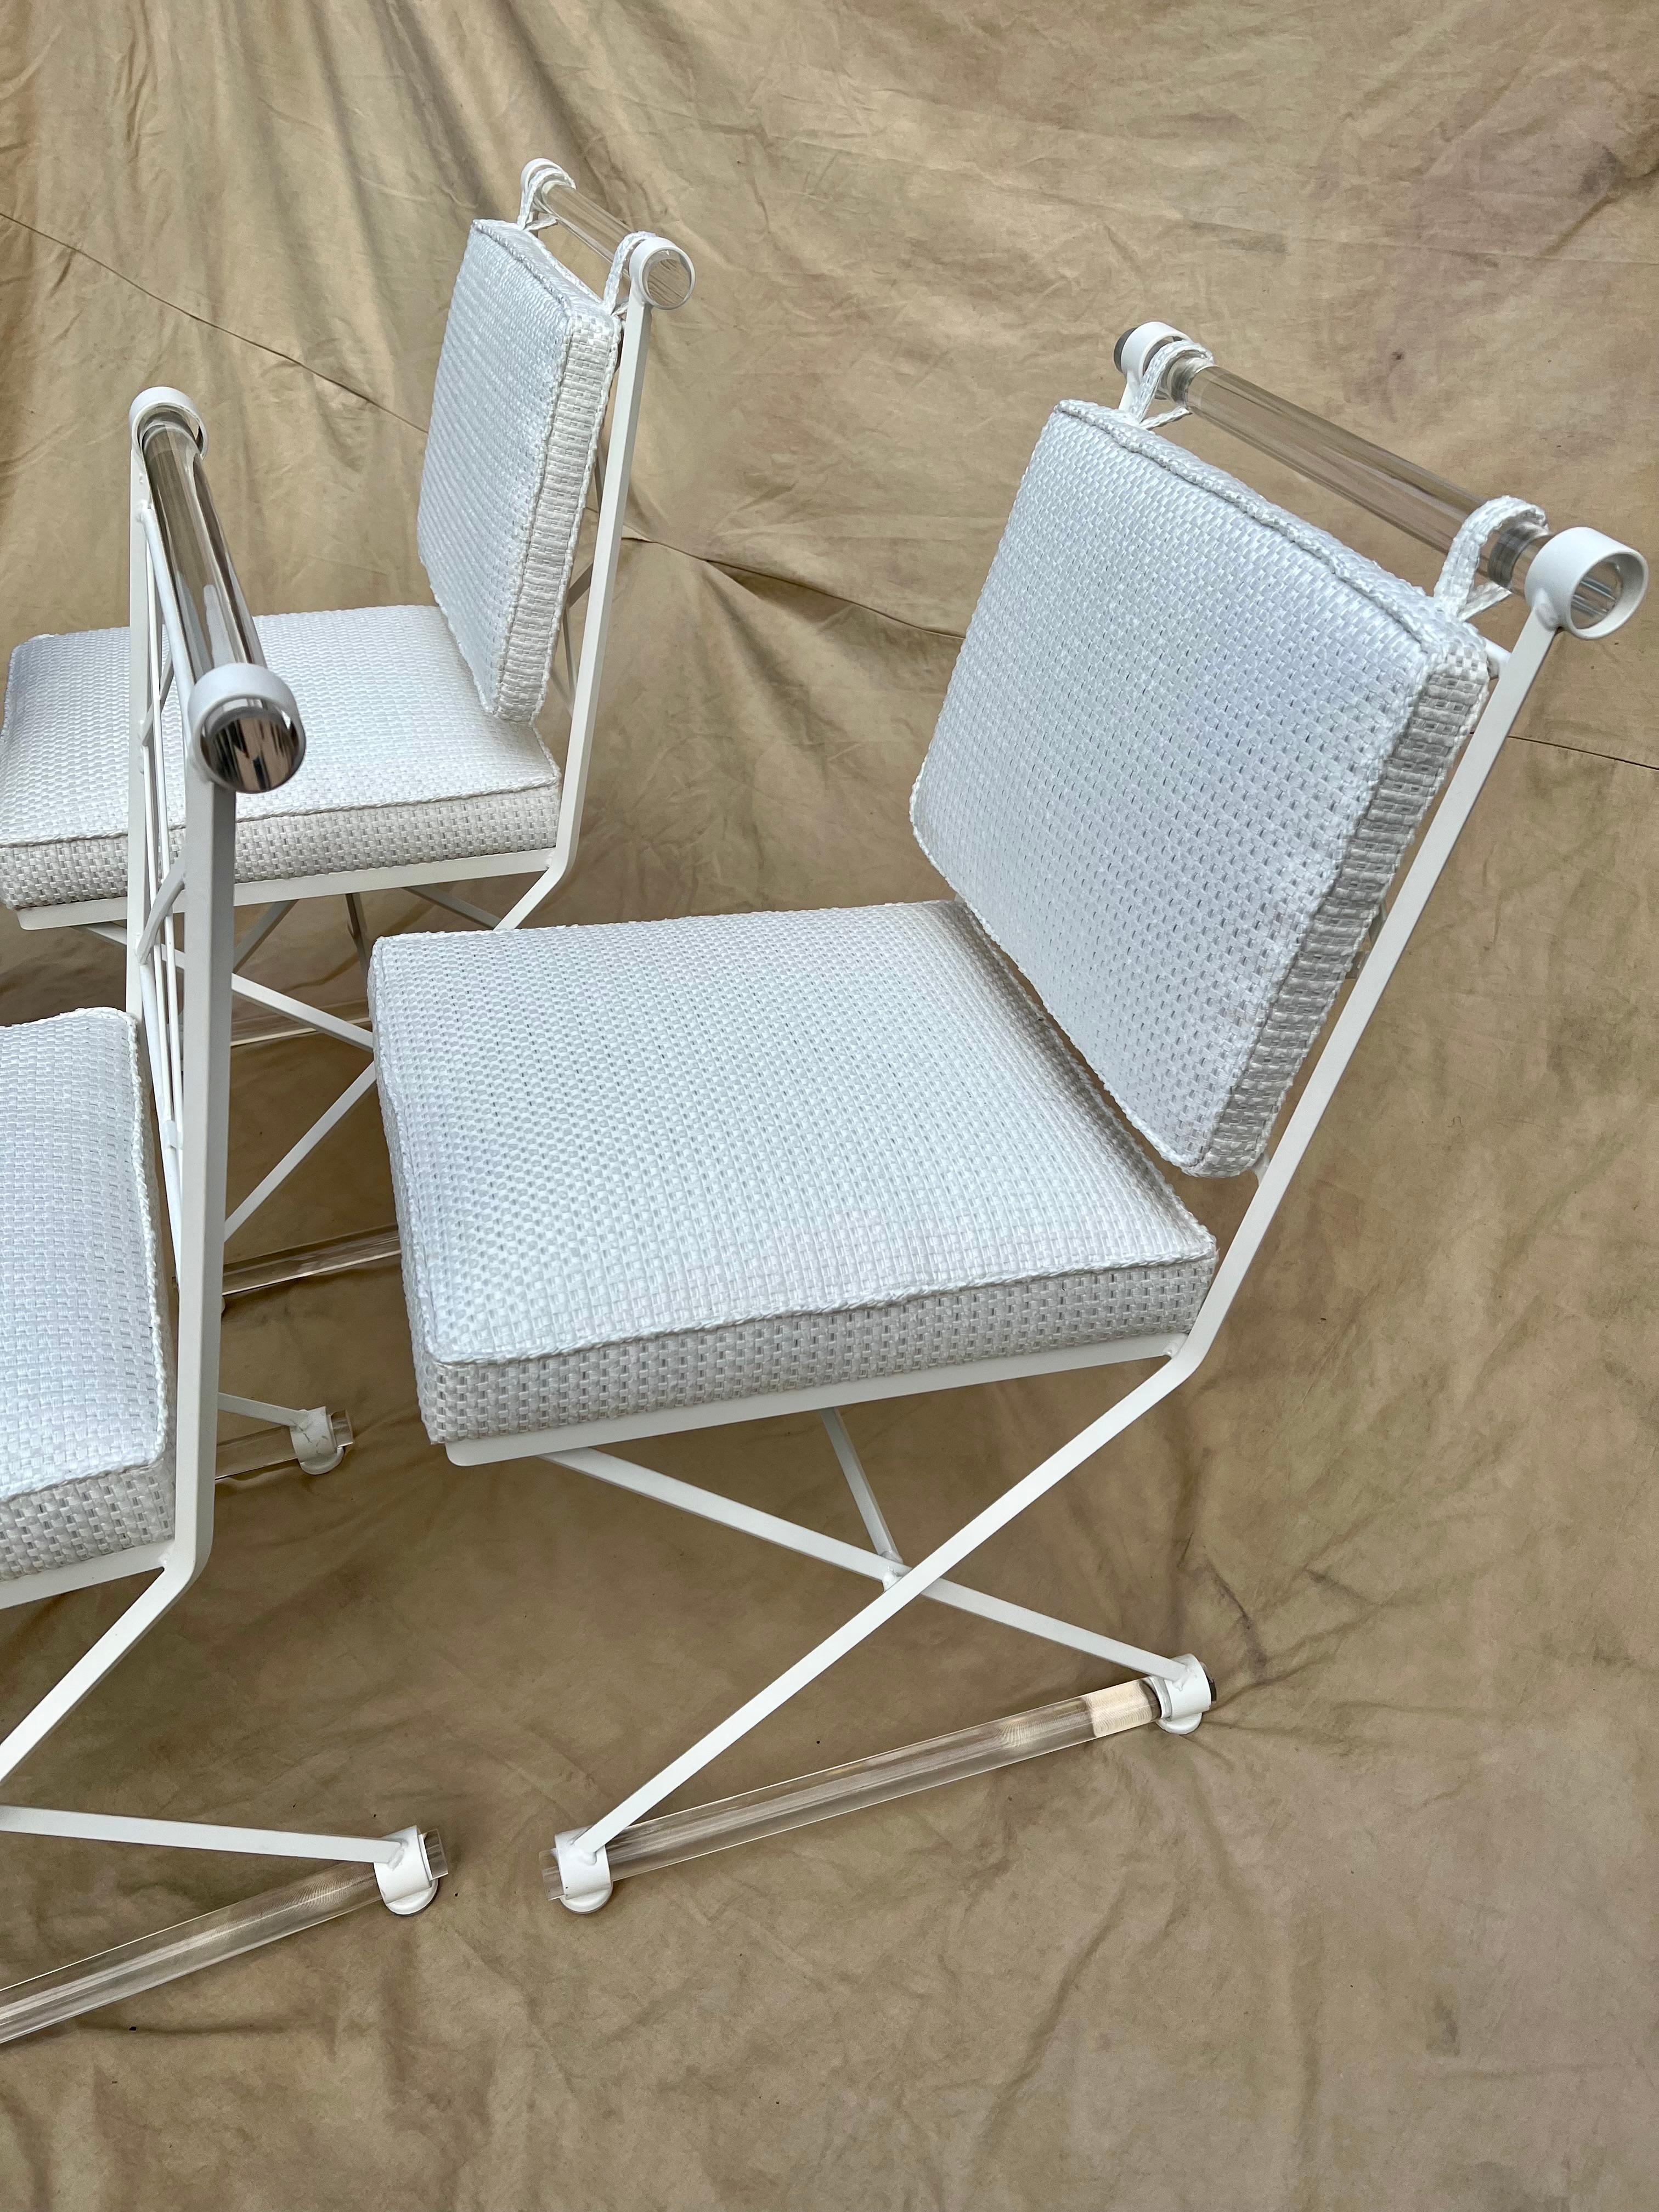 Cleo Baldon X-Form Chairs Restored with Acrylic Dowels and Sunbrella Upholstery For Sale 7